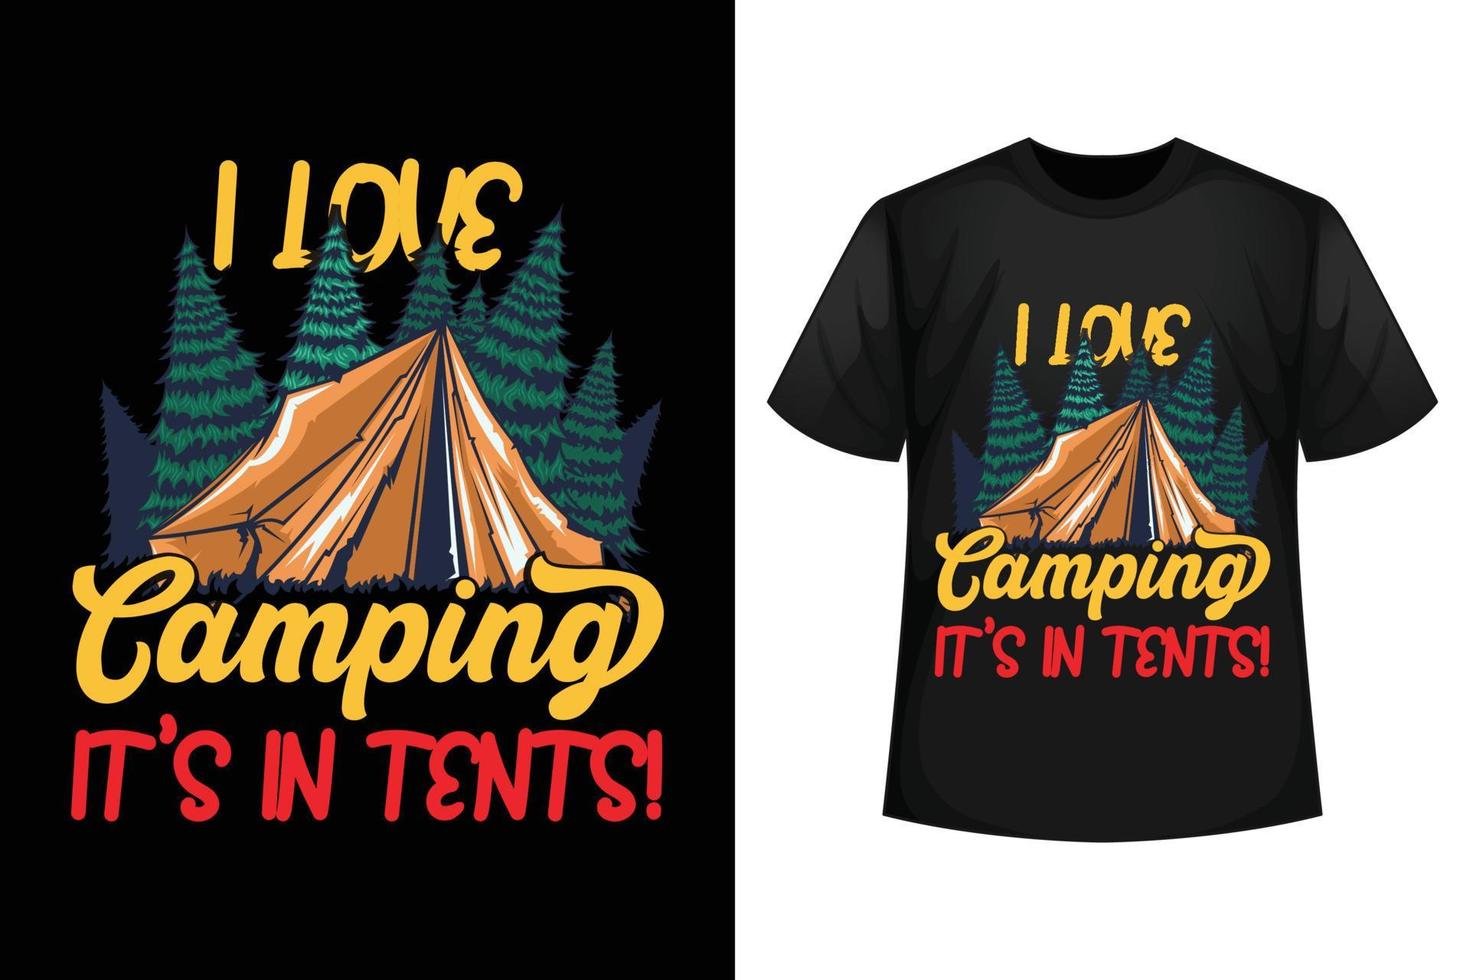 I love camping it's in tents - Camping t-shirt design template vector